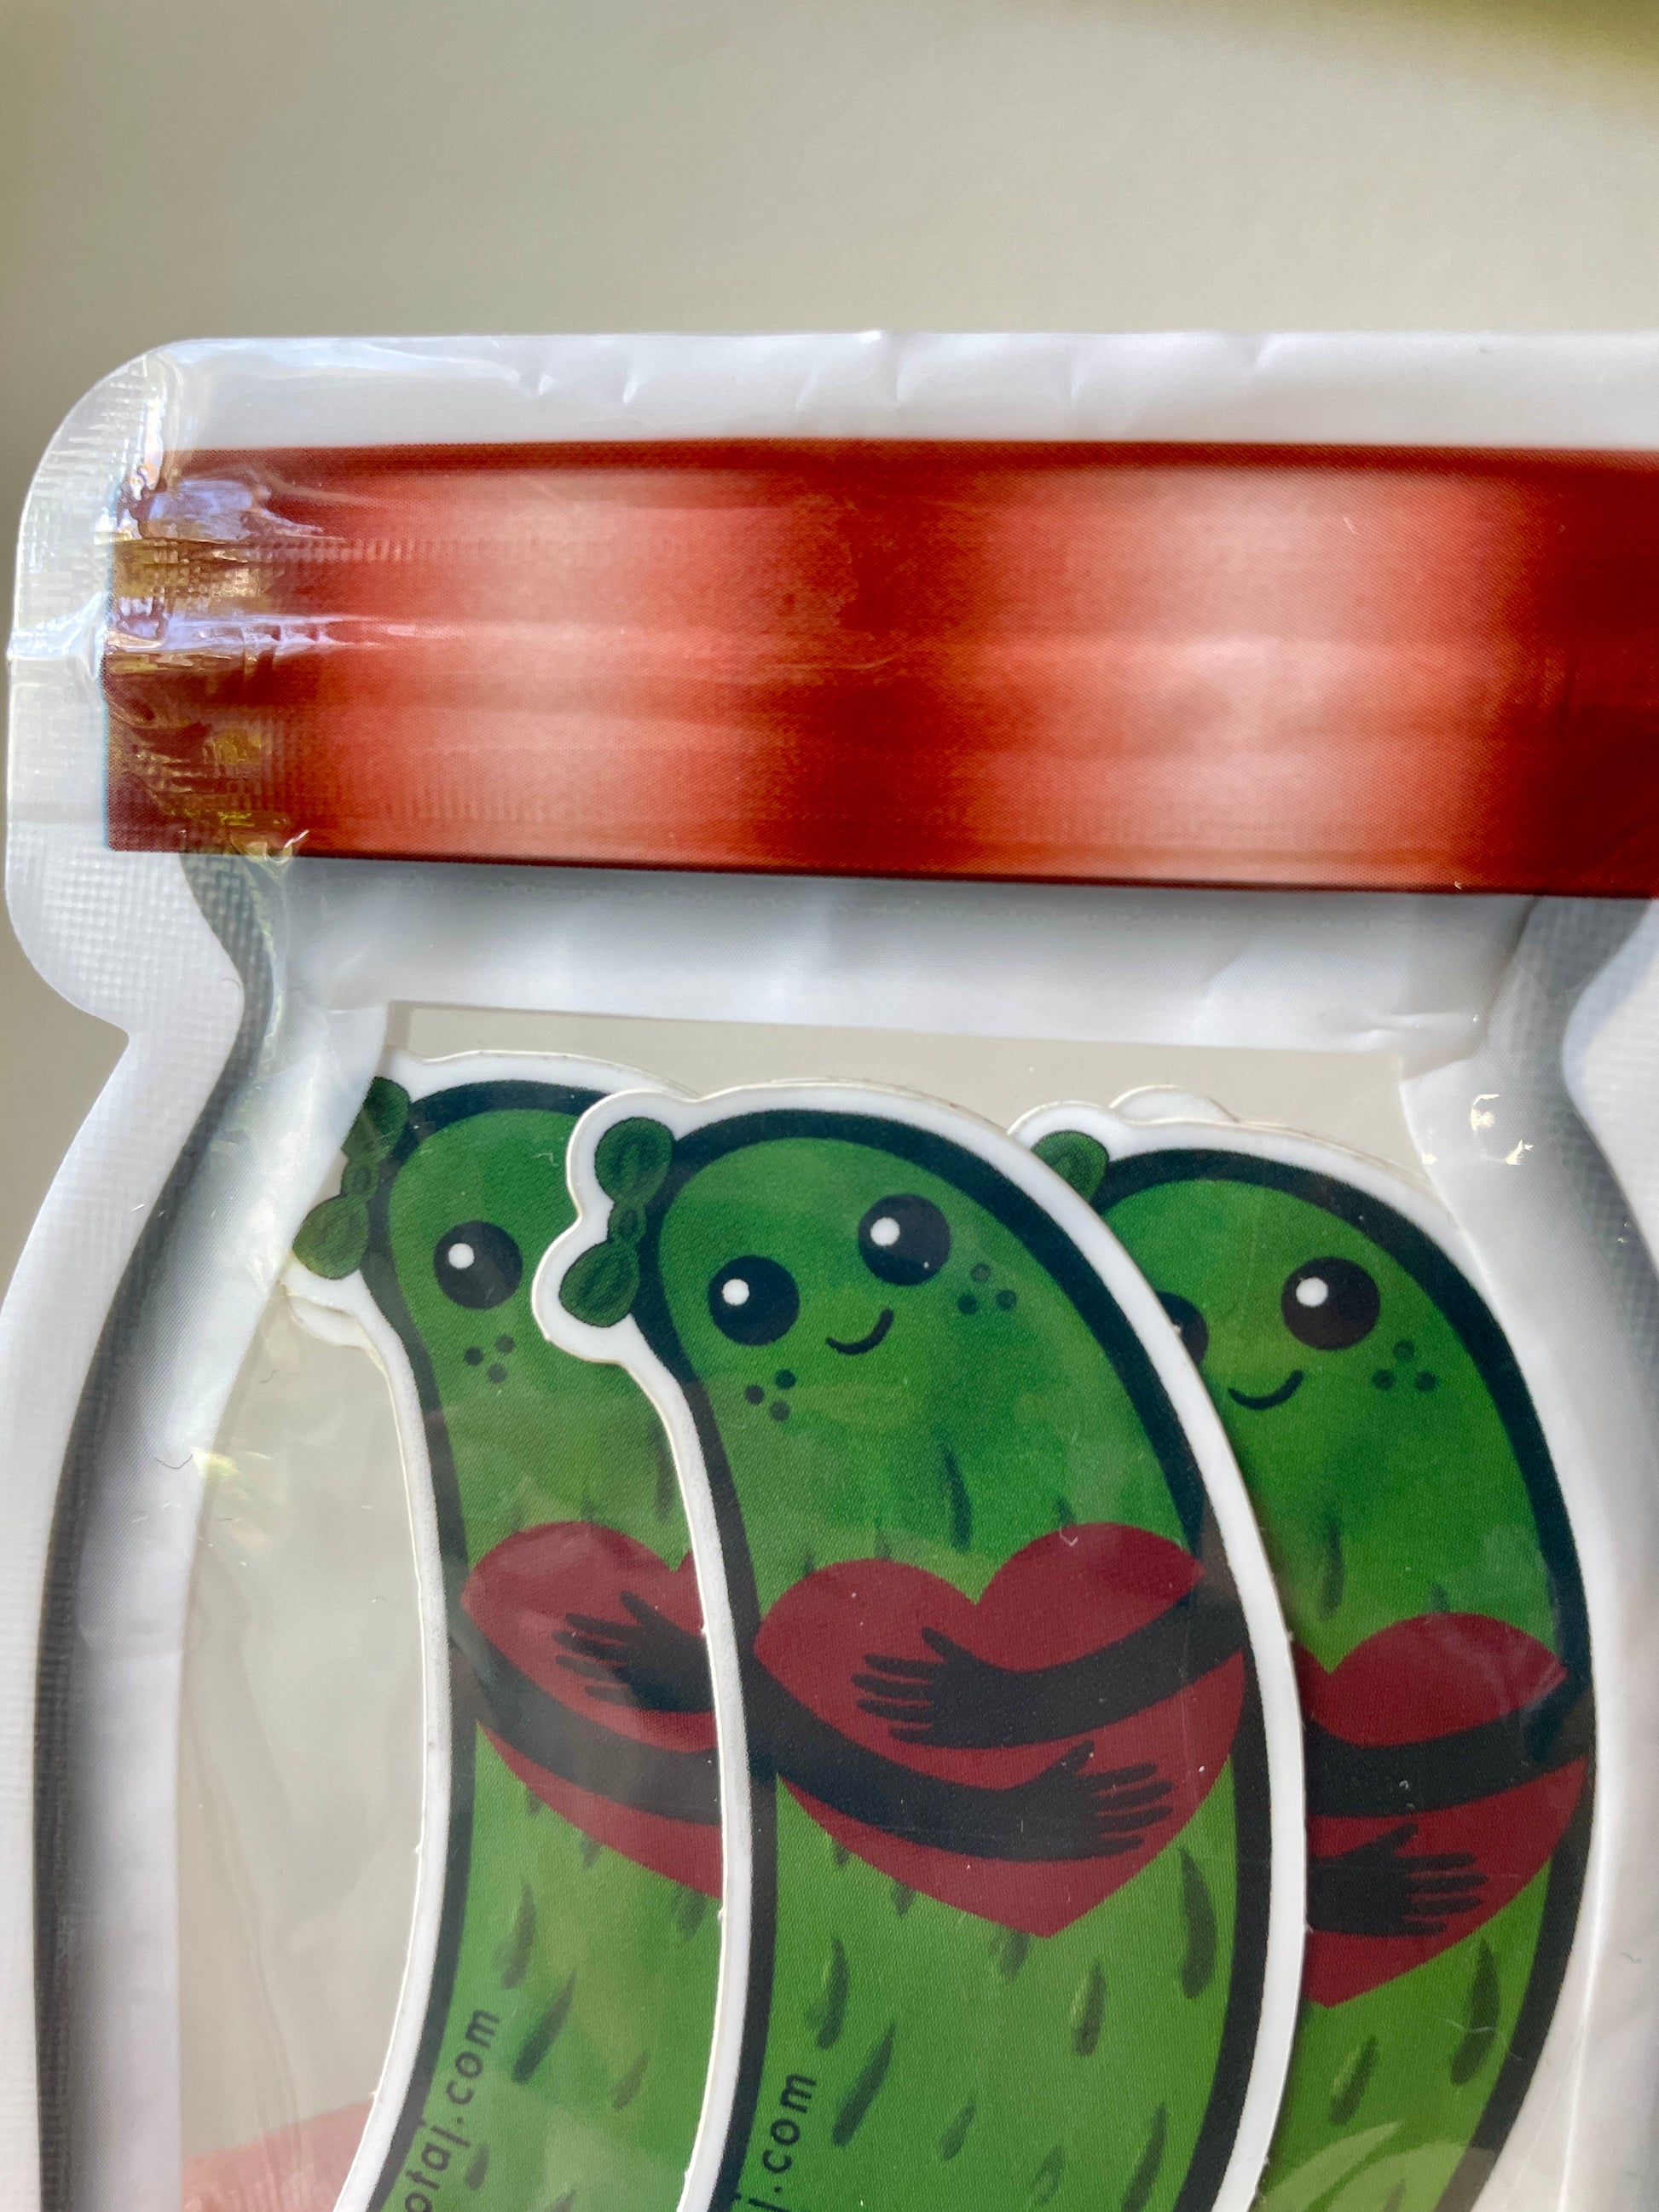 Plastic bag that looks like a jar filled with stickers that look like adorable happy pickles holding a heart.